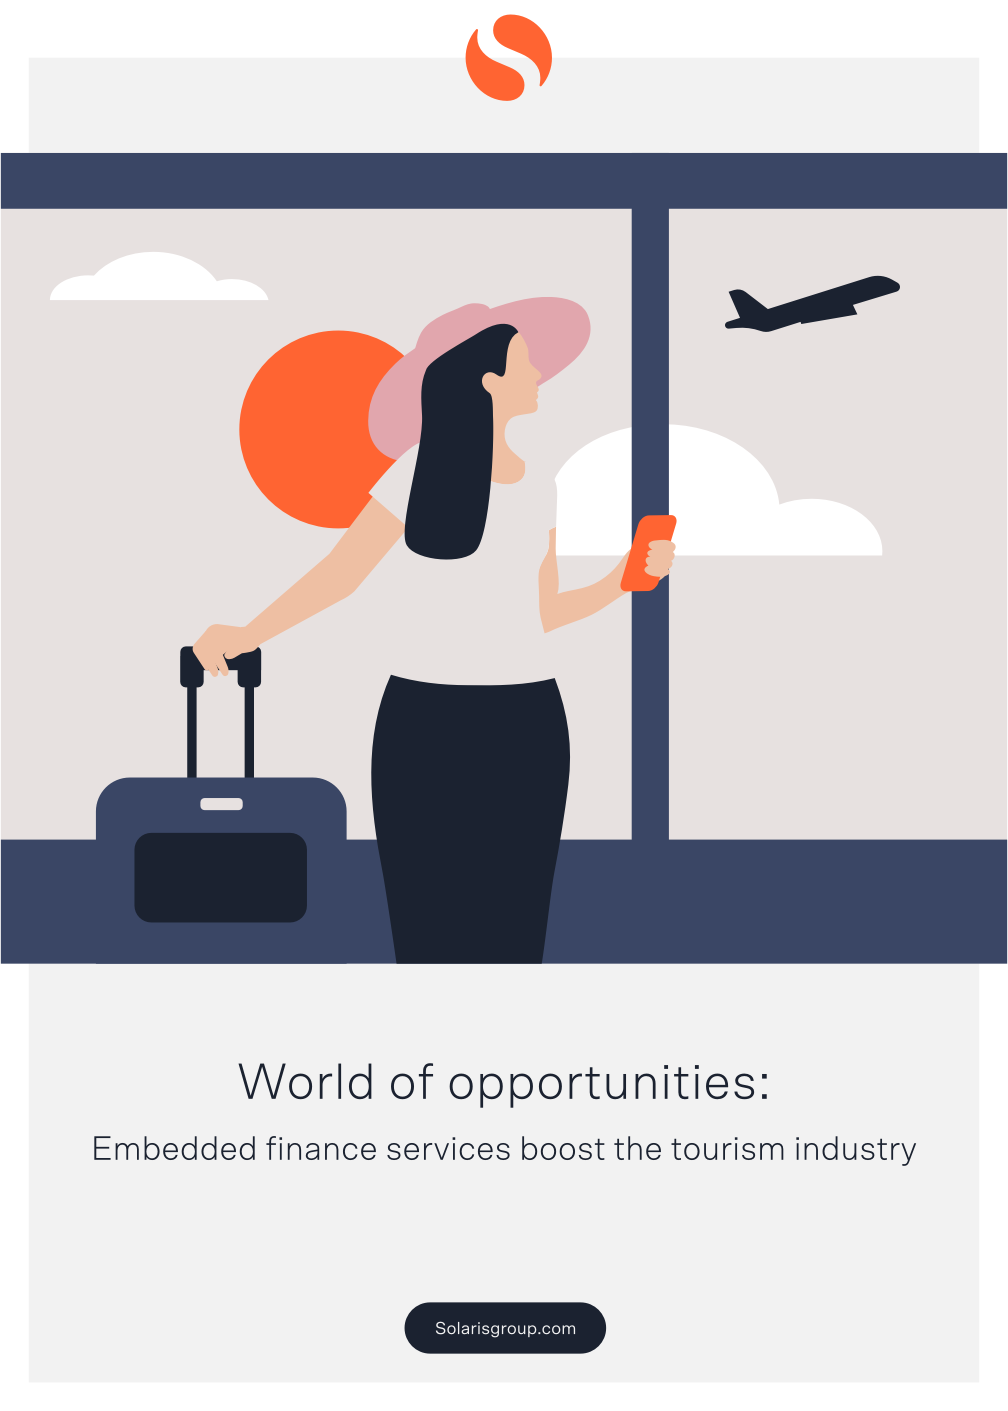 World of opportunities: embedded finance services boost the tourism industry